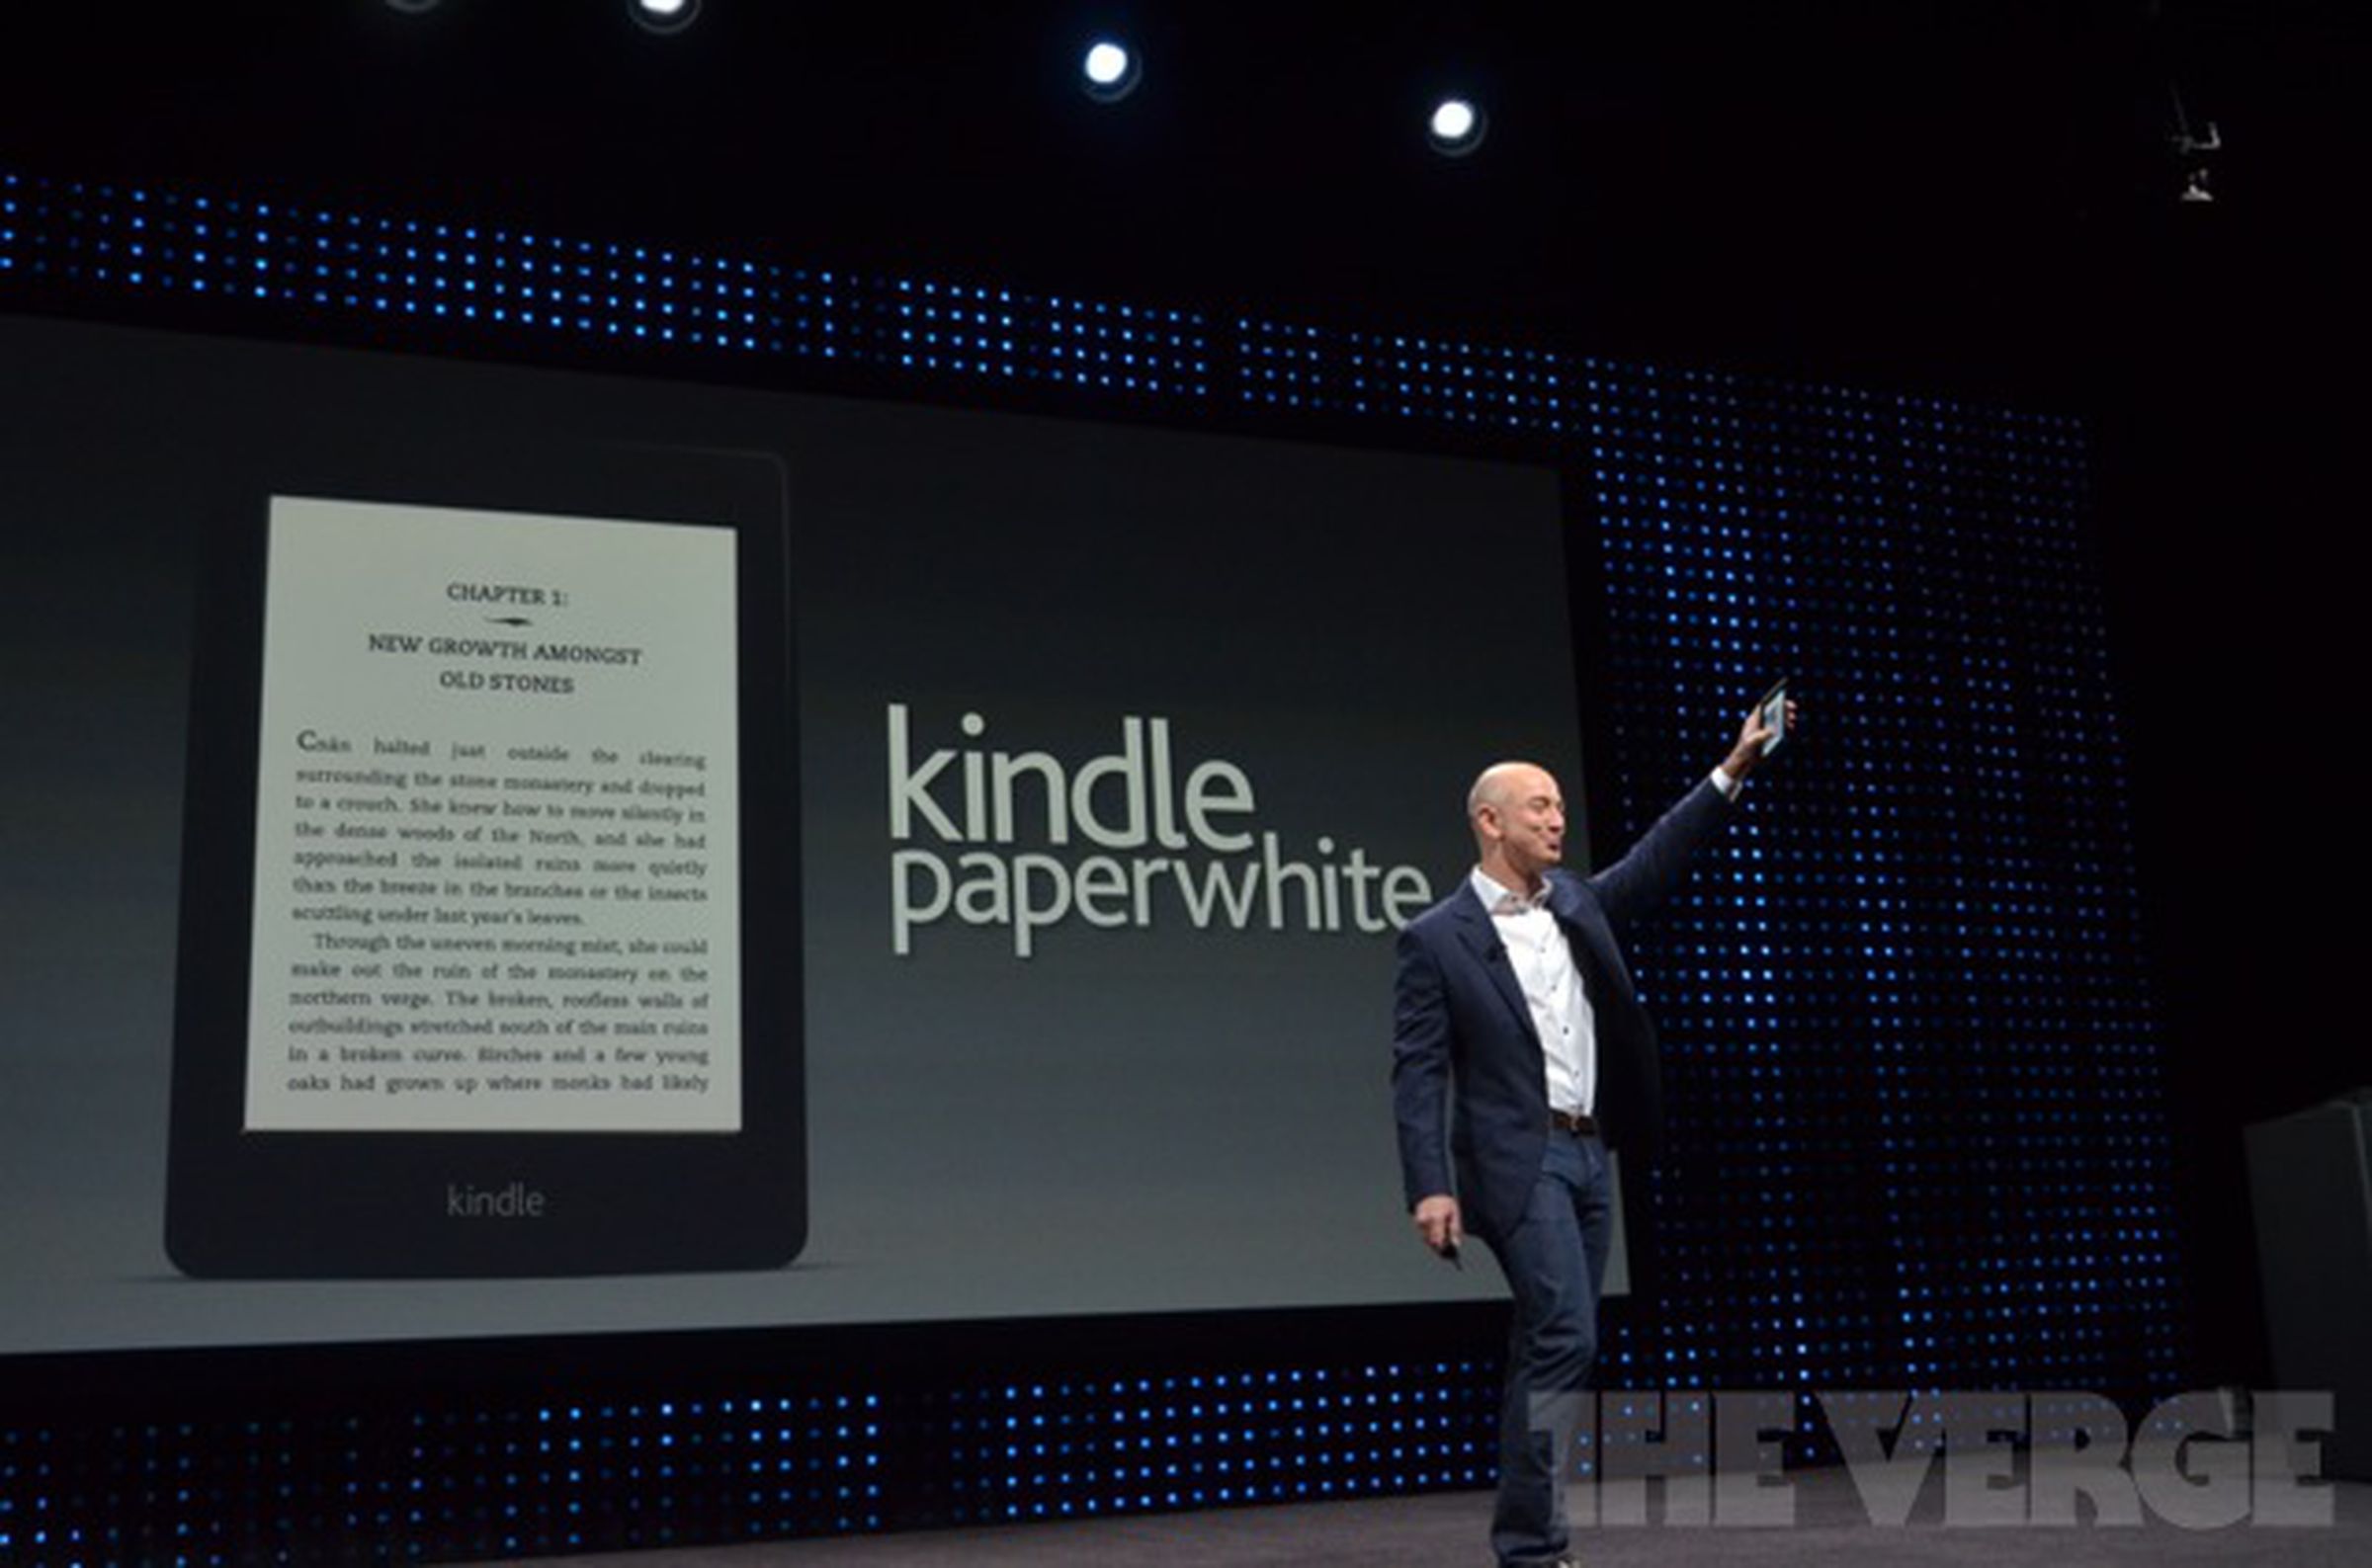 Amazon Kindle paperwhite pictures